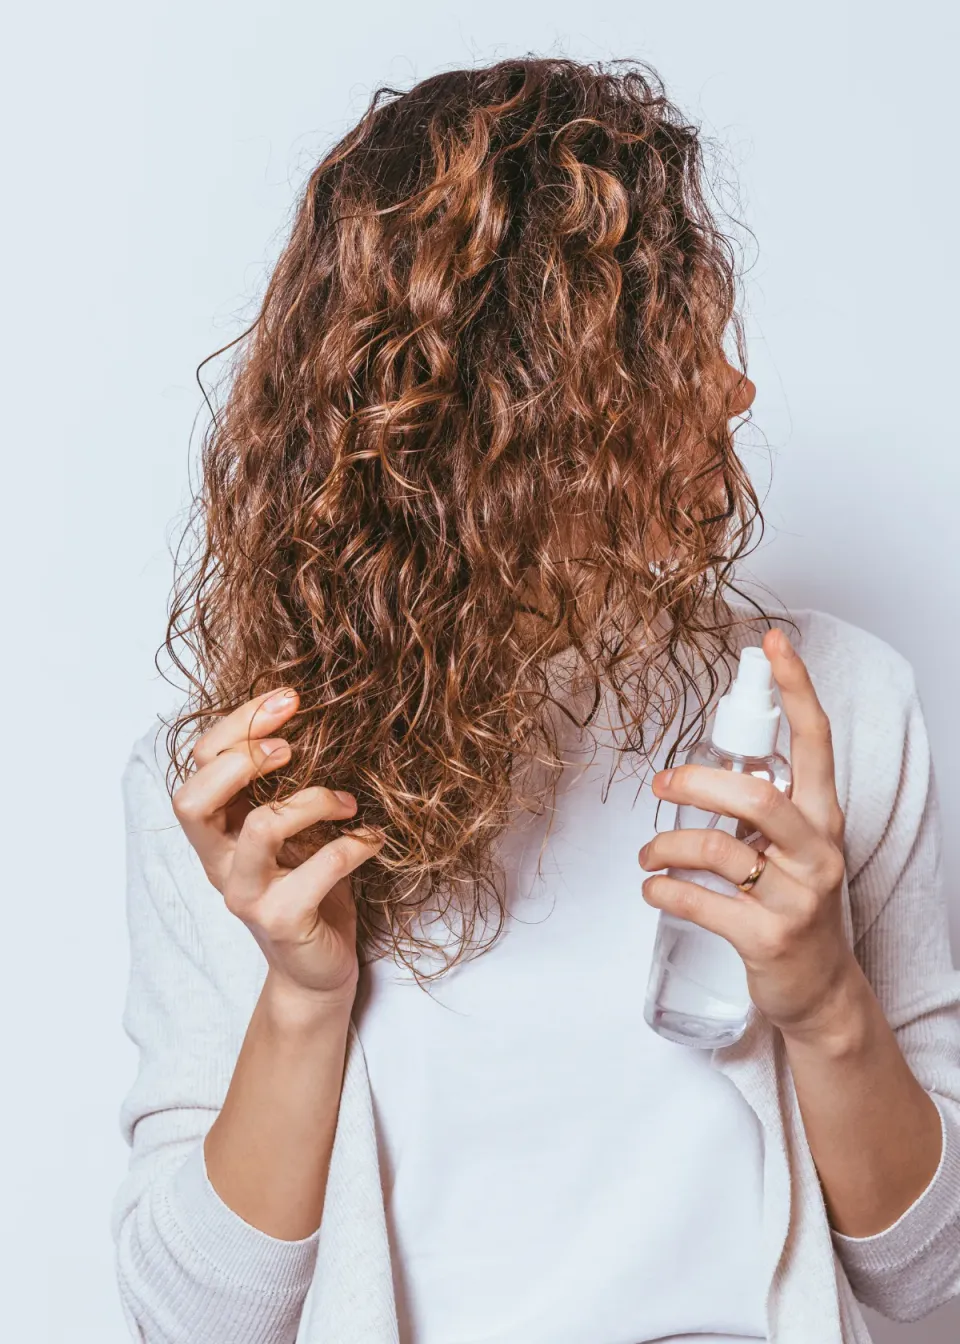 Best Shampoo For Scalp Acne Revealed: Top 5 Approved Picks